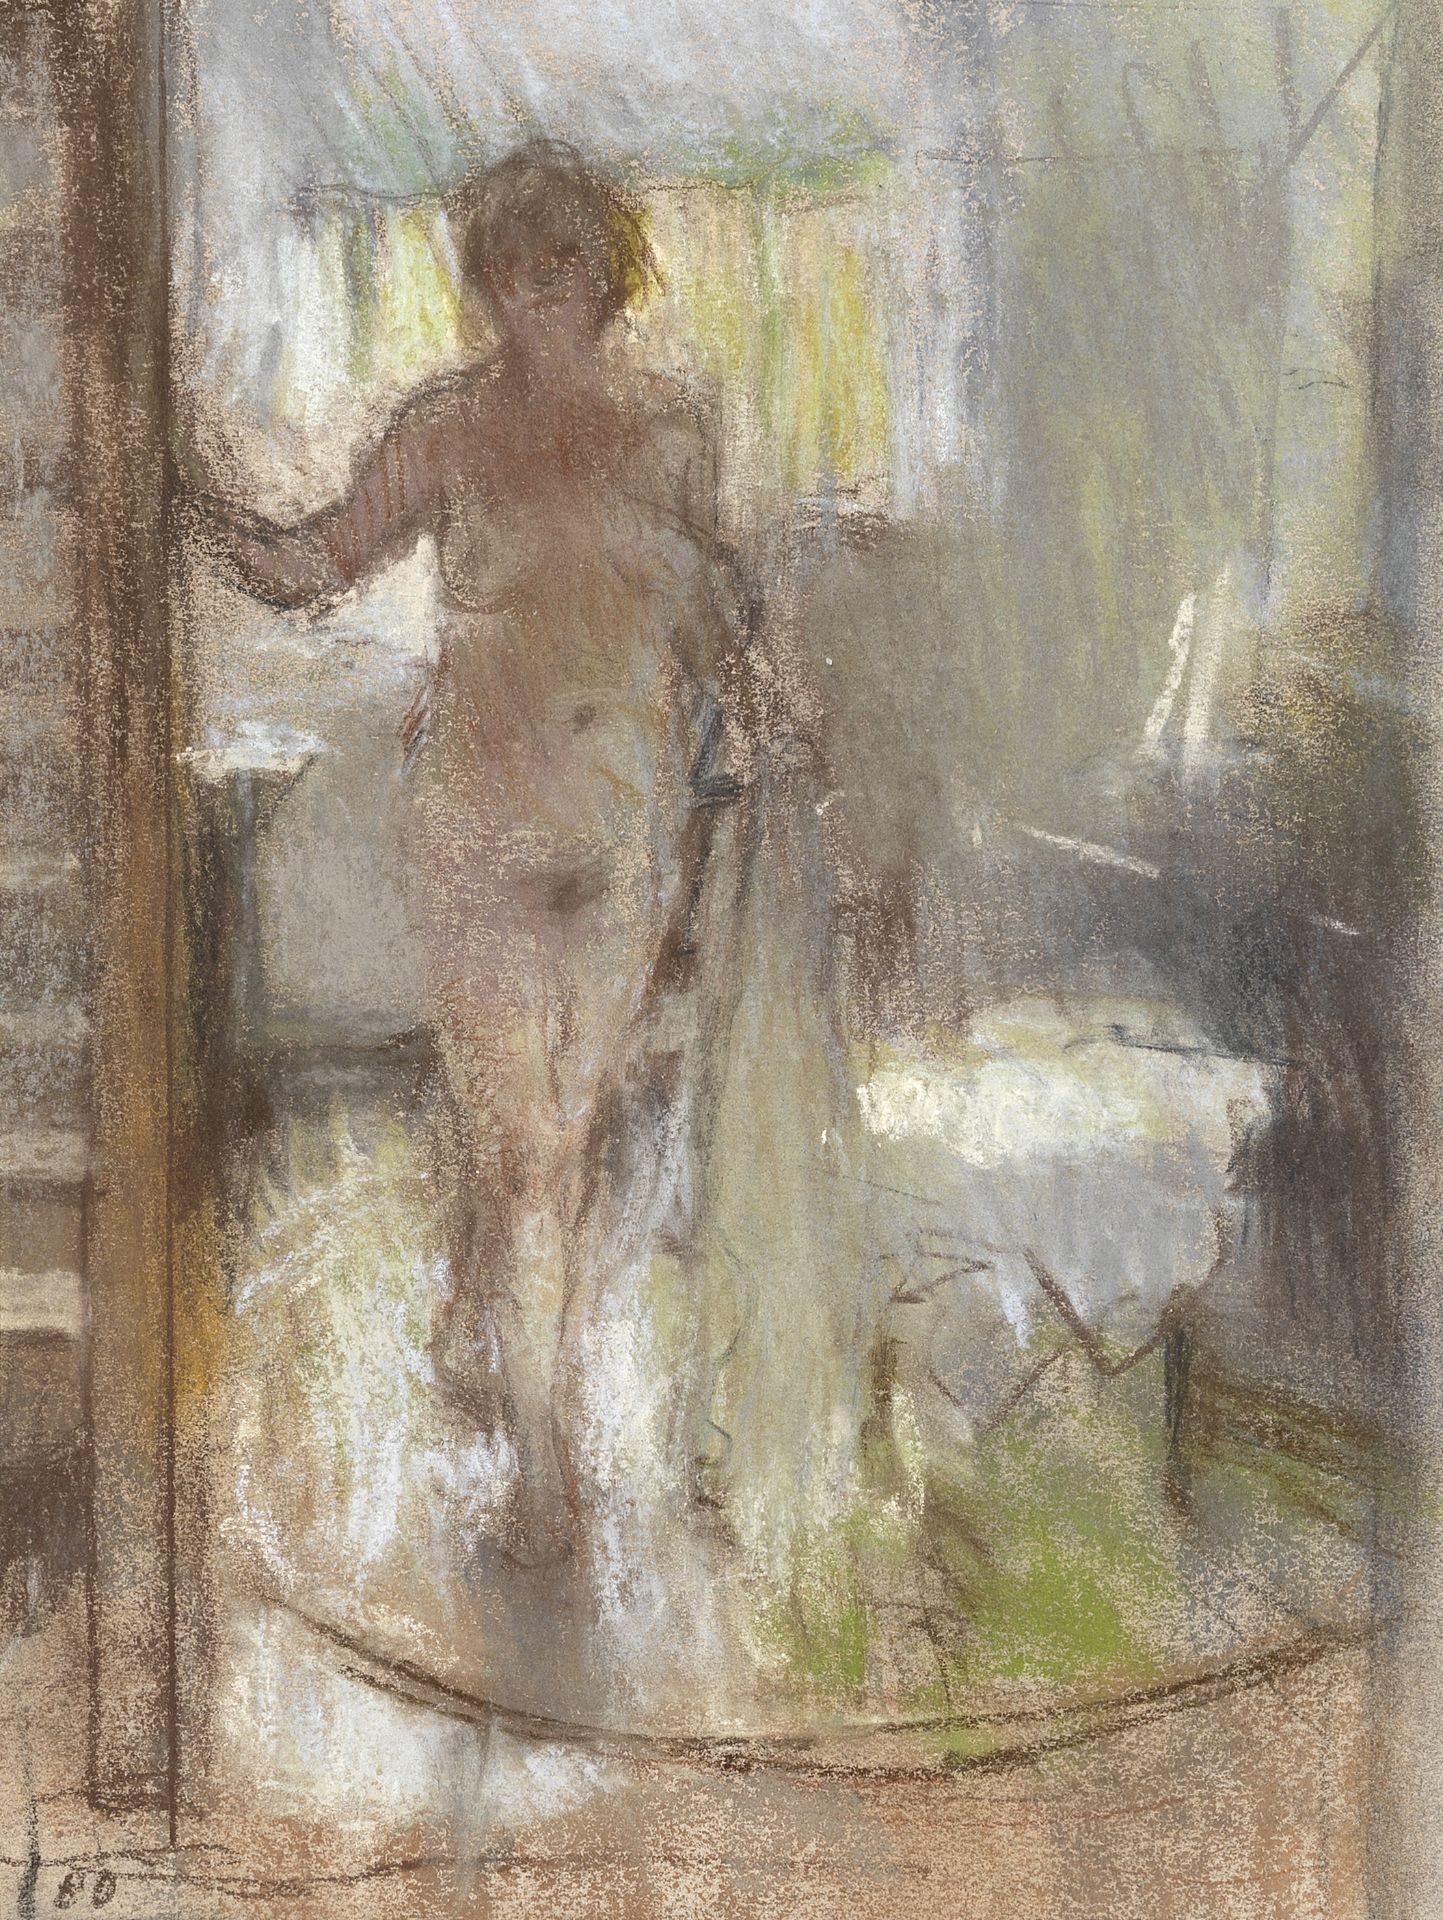 Bernard Dunstan R.A., R.W.A., N.E.A.C., H.P.S. (British, 1920-2017) Standing Female Nude